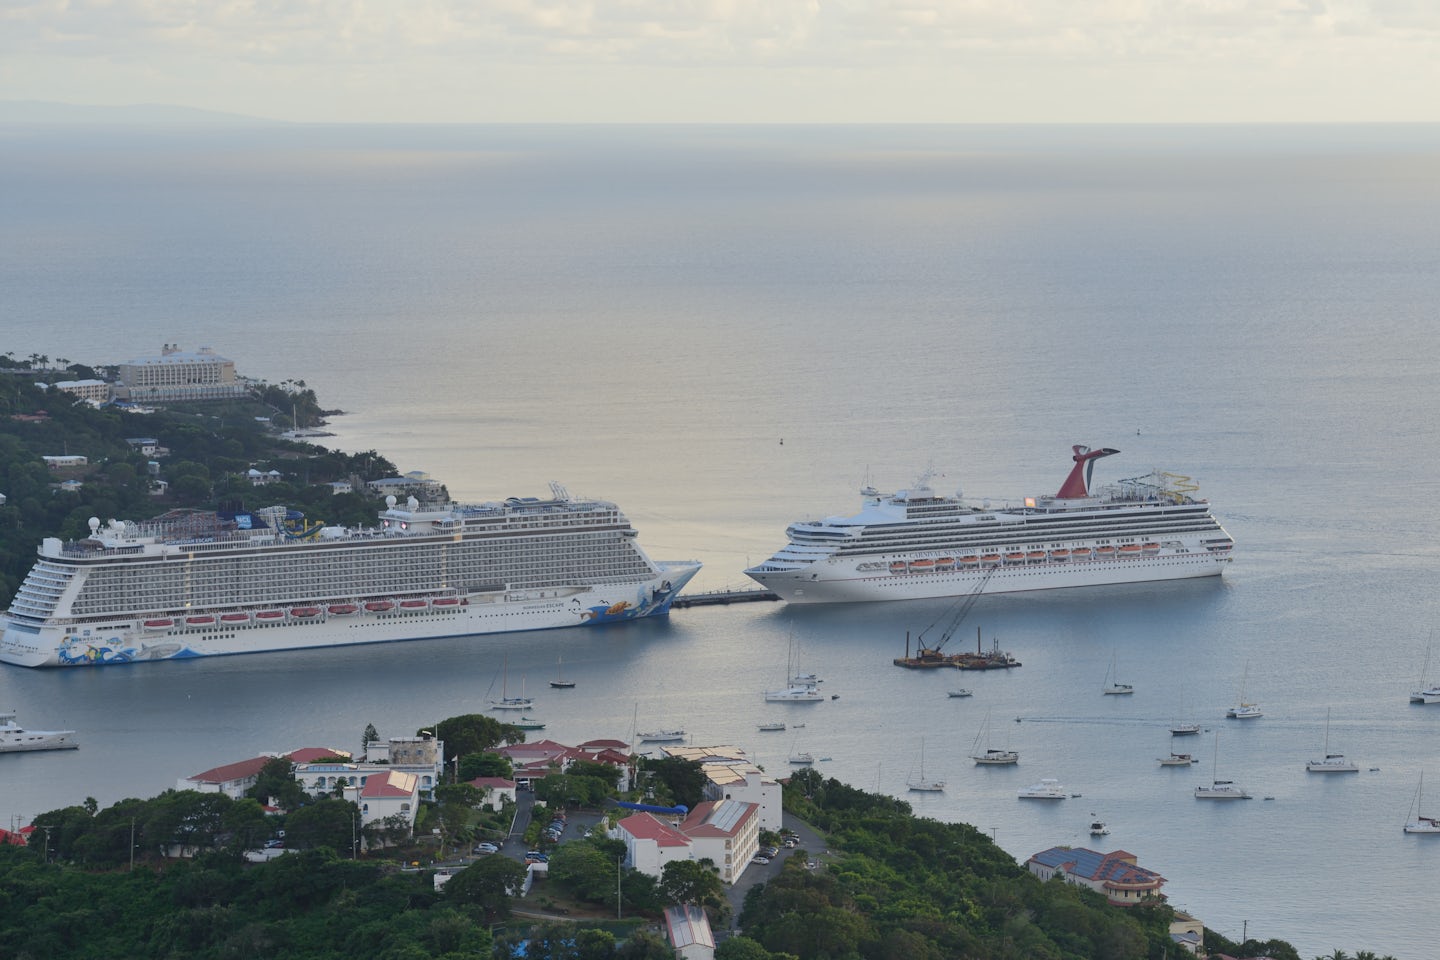 Carnival Sunshine is dwarfed by Norwegian Escape at anchor in St. Thomas, U.S. Virgin Islands.